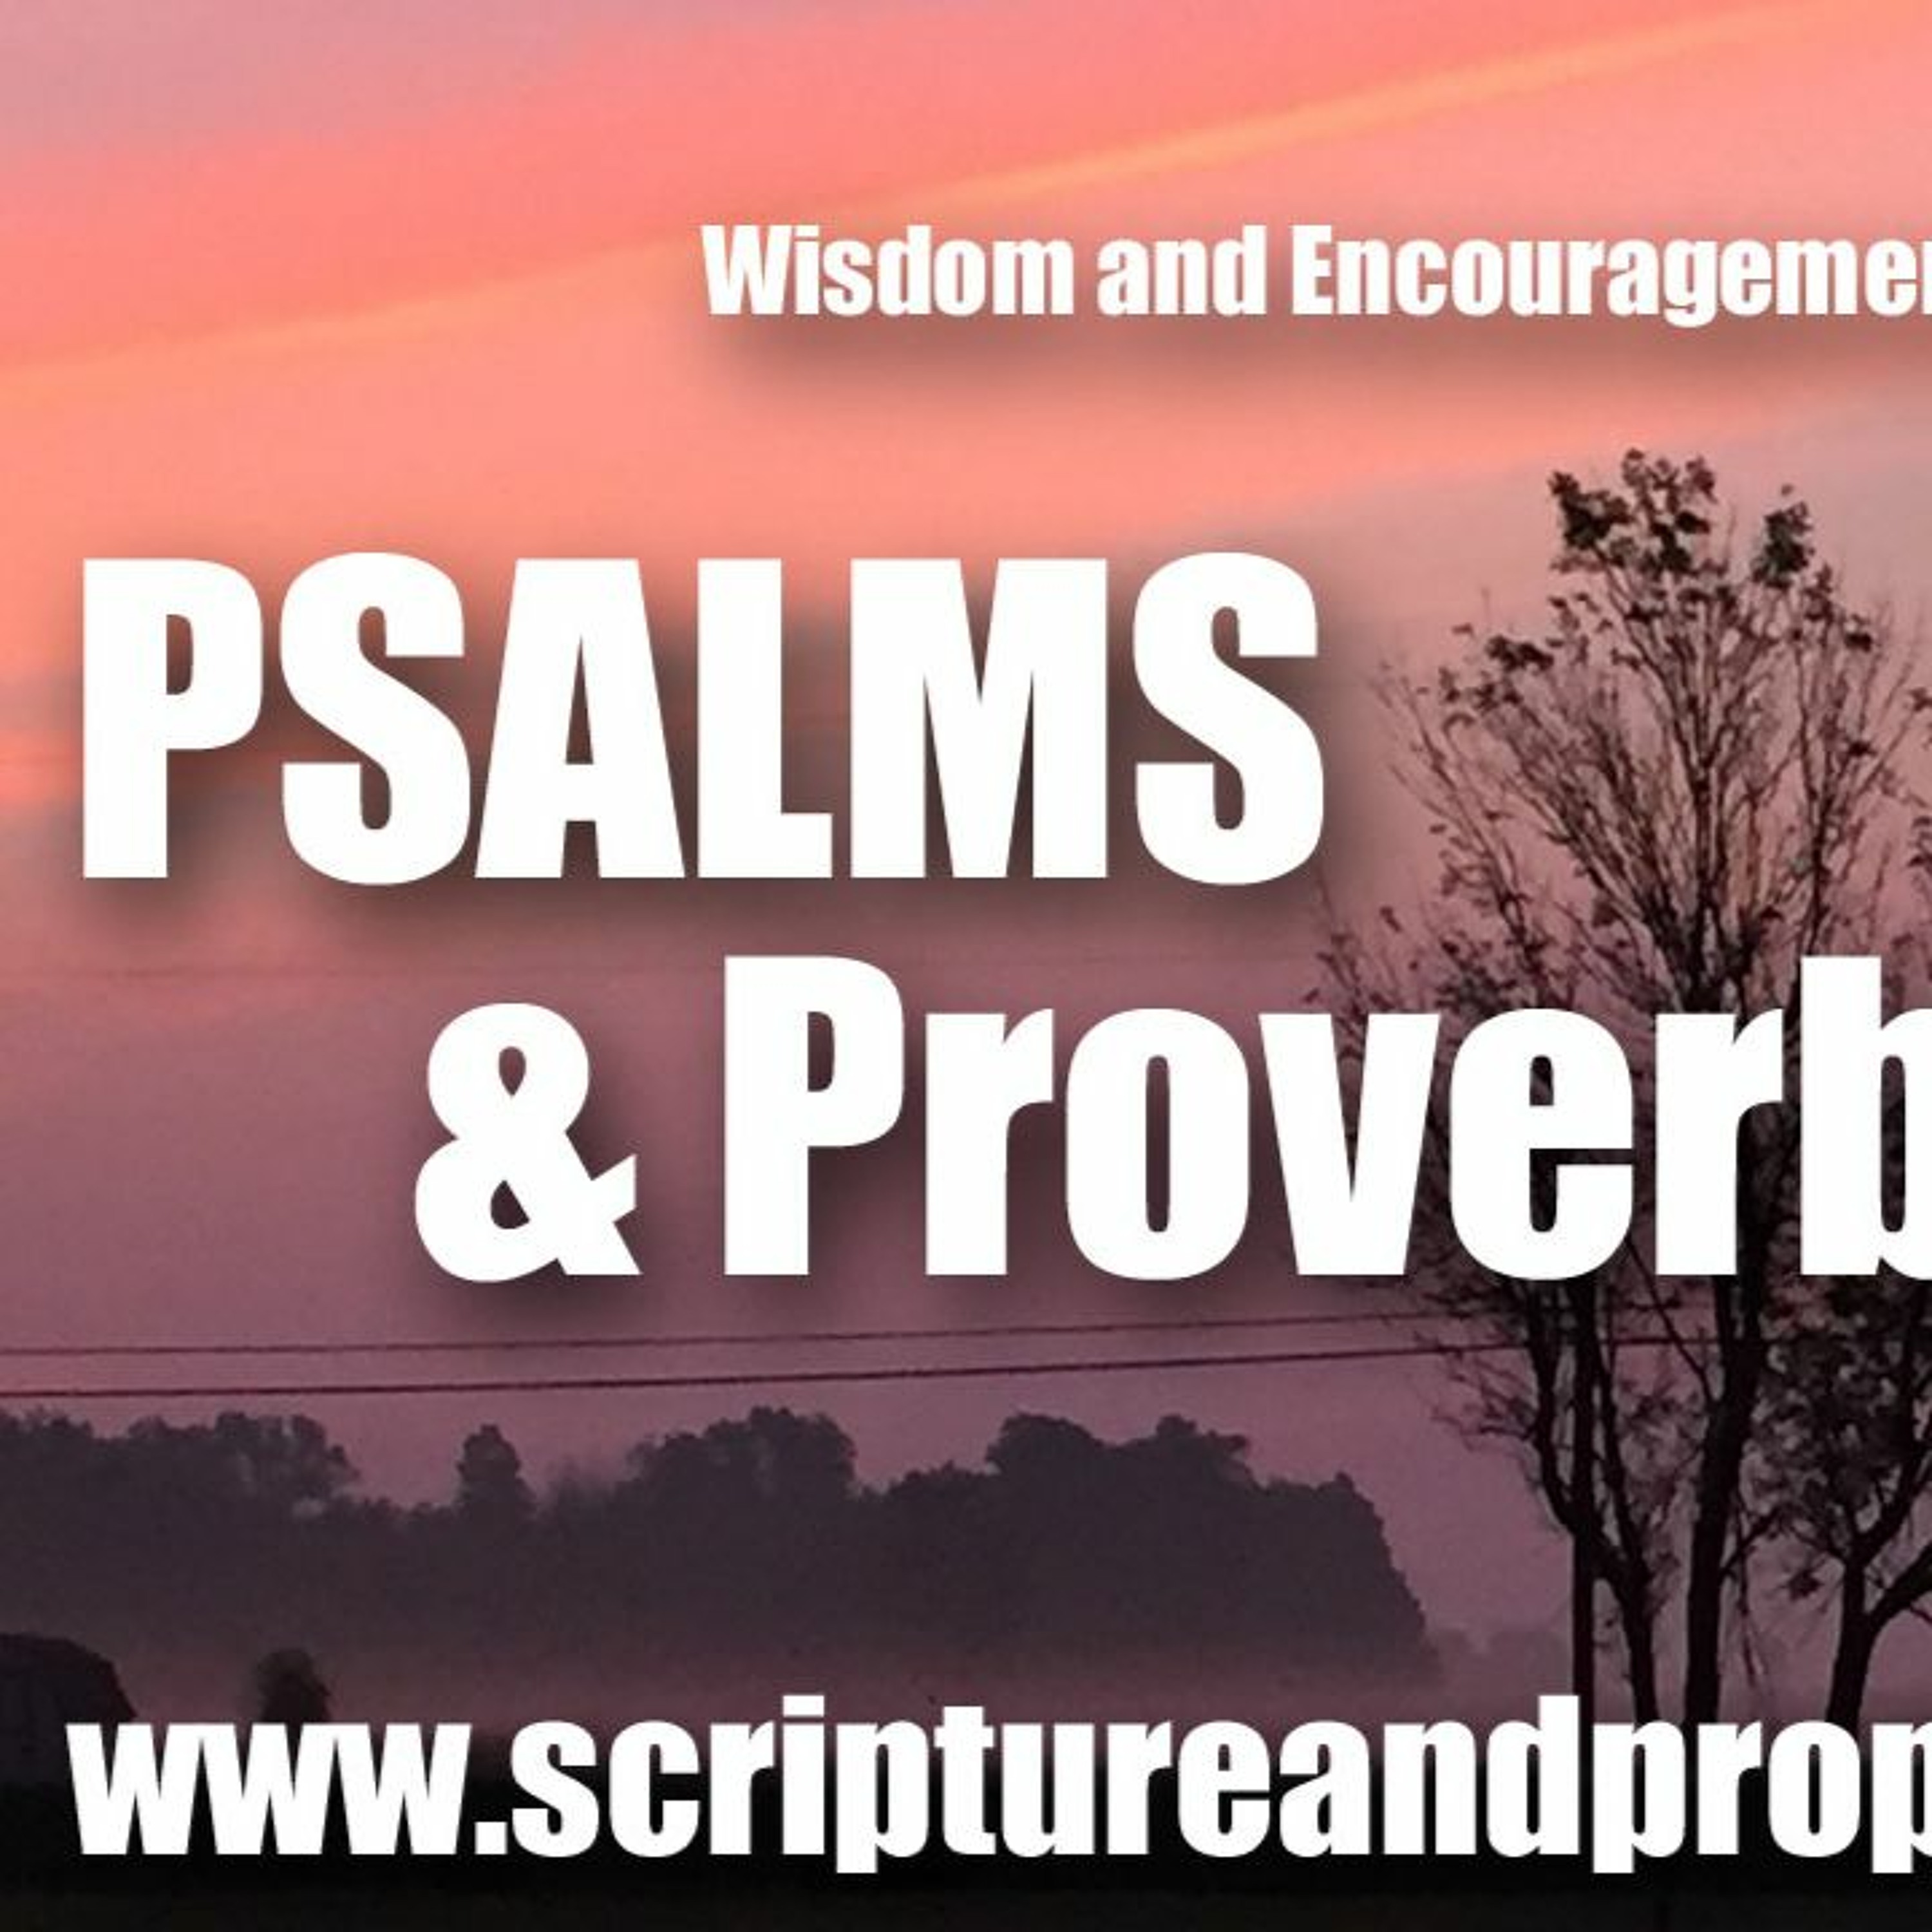 Wisdom From Psalm 8, Proverbs 13, & Wisdom 7: Hope Deferred Maketh The Heart Sick